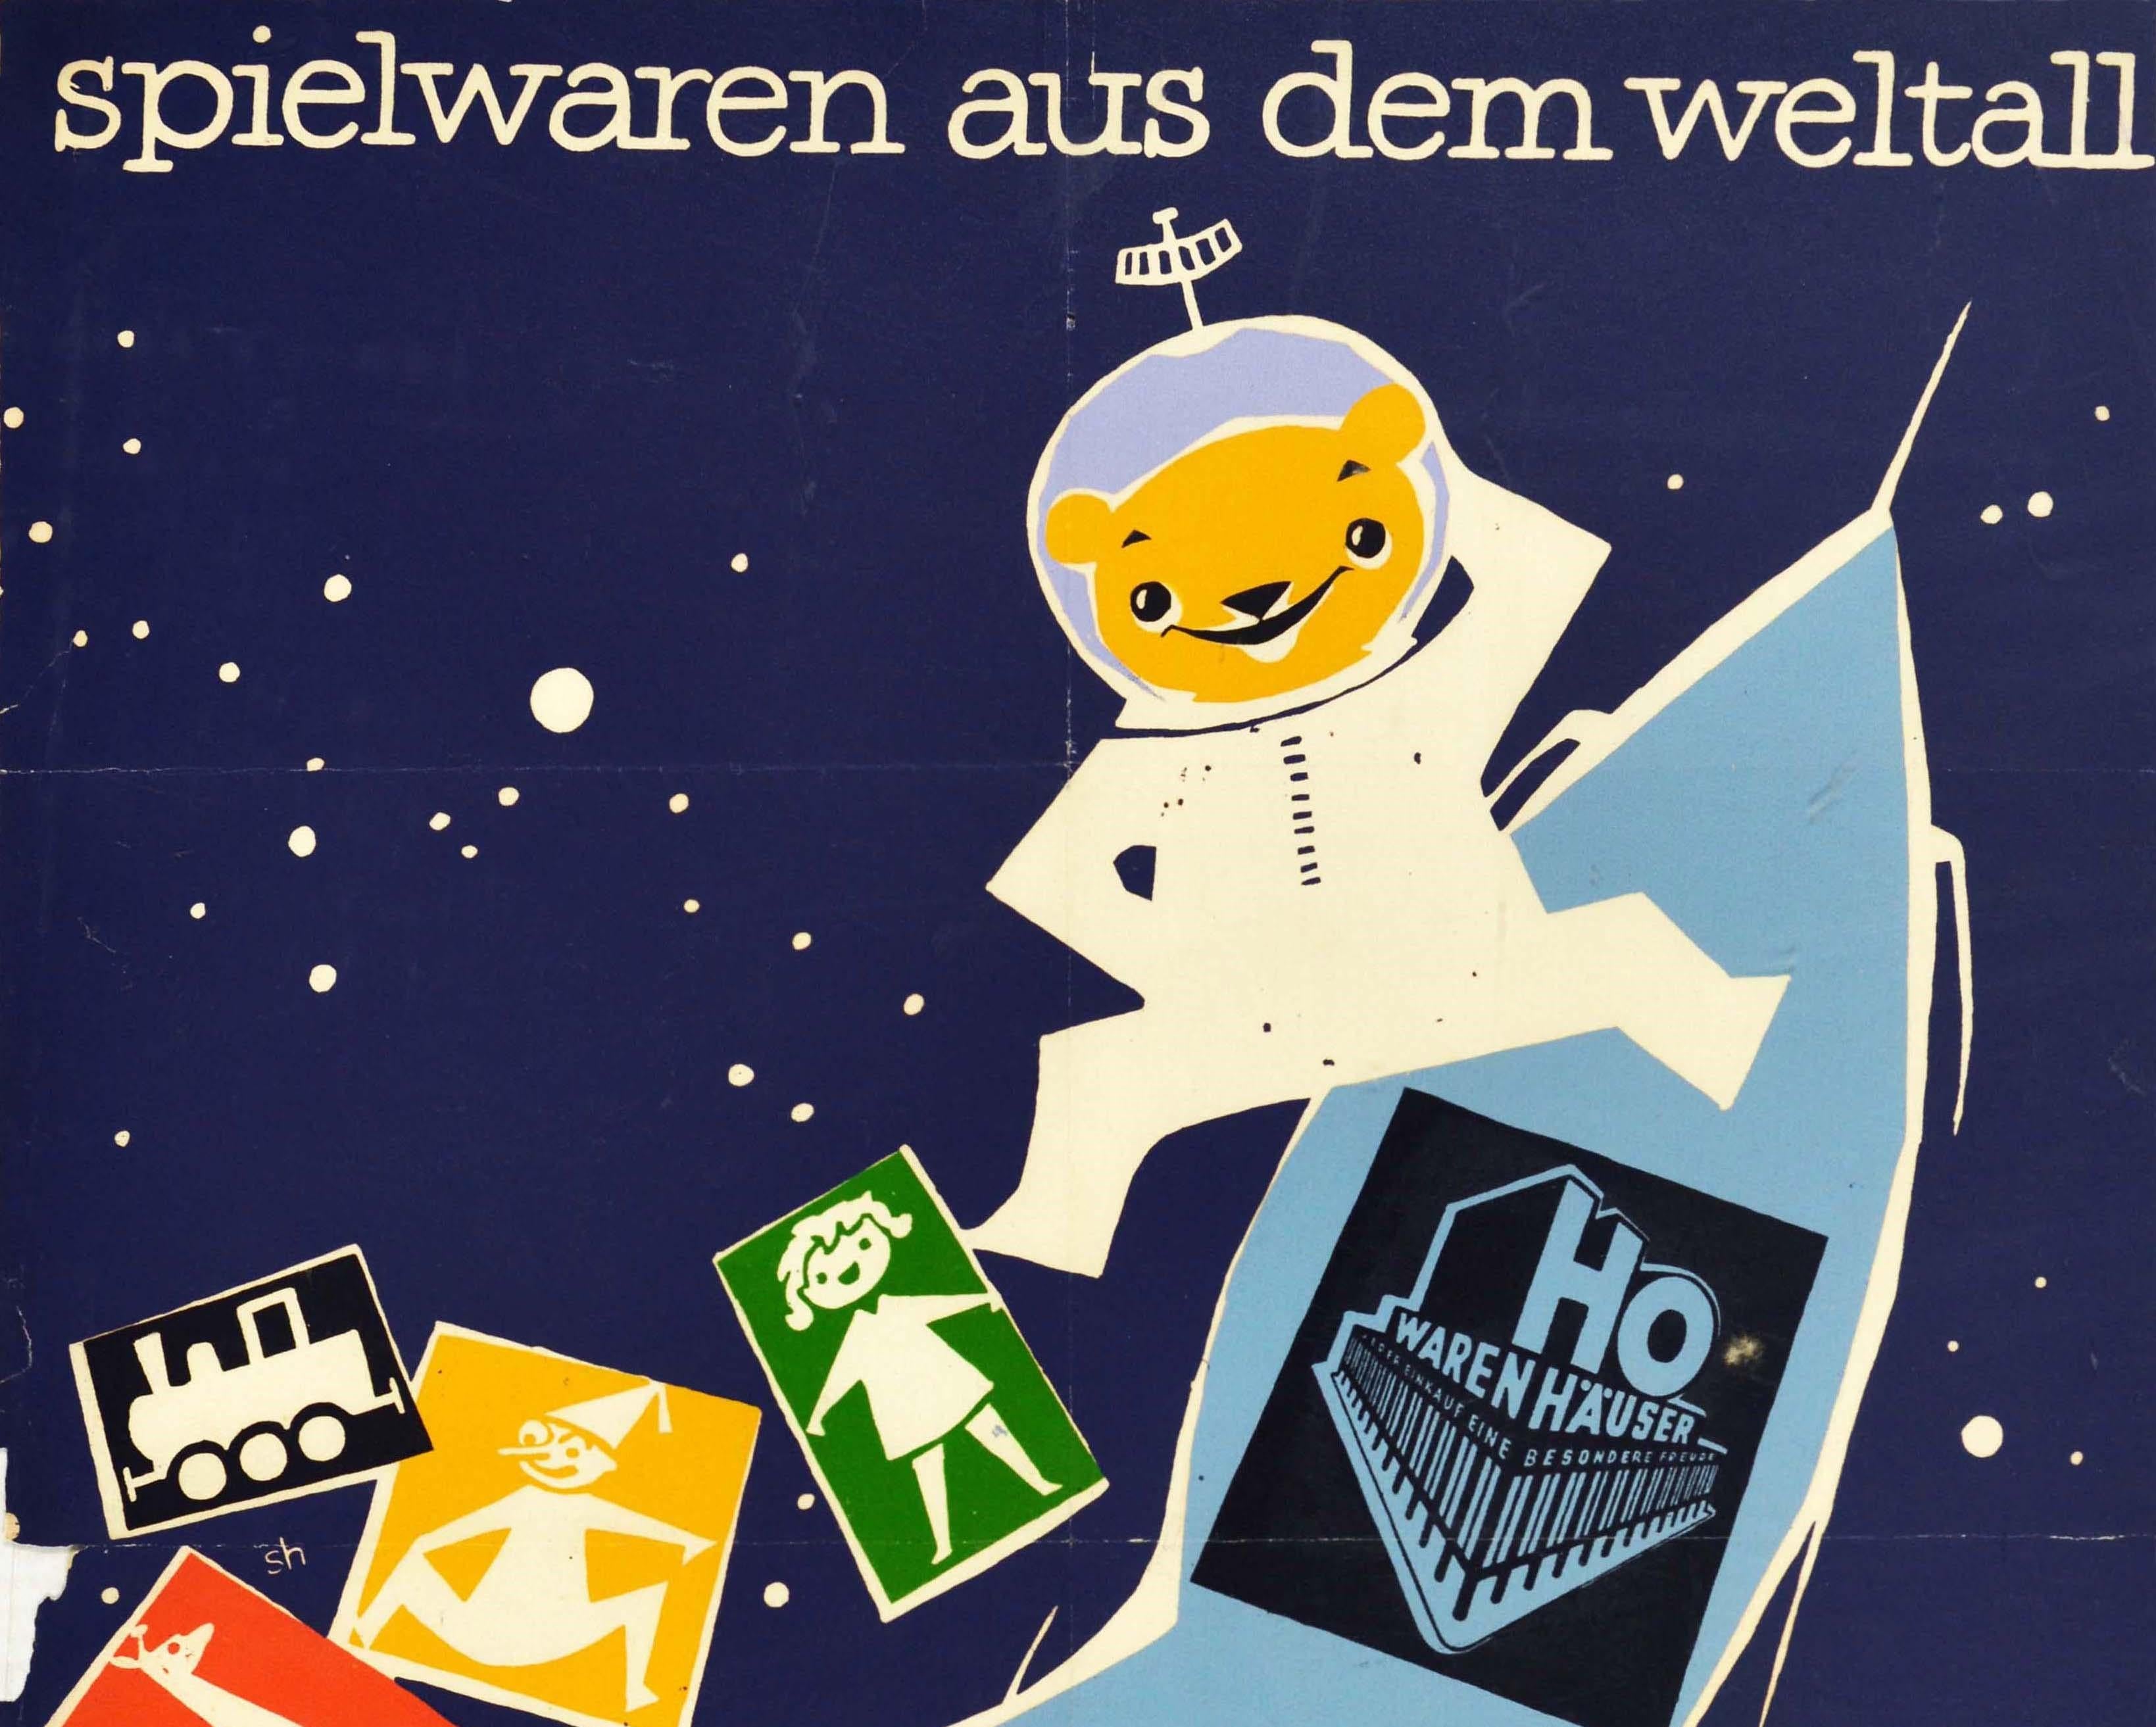 Original vintage advertising poster for Toys From Space / Spielwaren Aus Dem Weltall at the Ho Warenhauser department store in Leipzig Germany featuring a fun design depicting a teddy bear in an astronaut / cosmonaut spacesuit smiling at the viewer